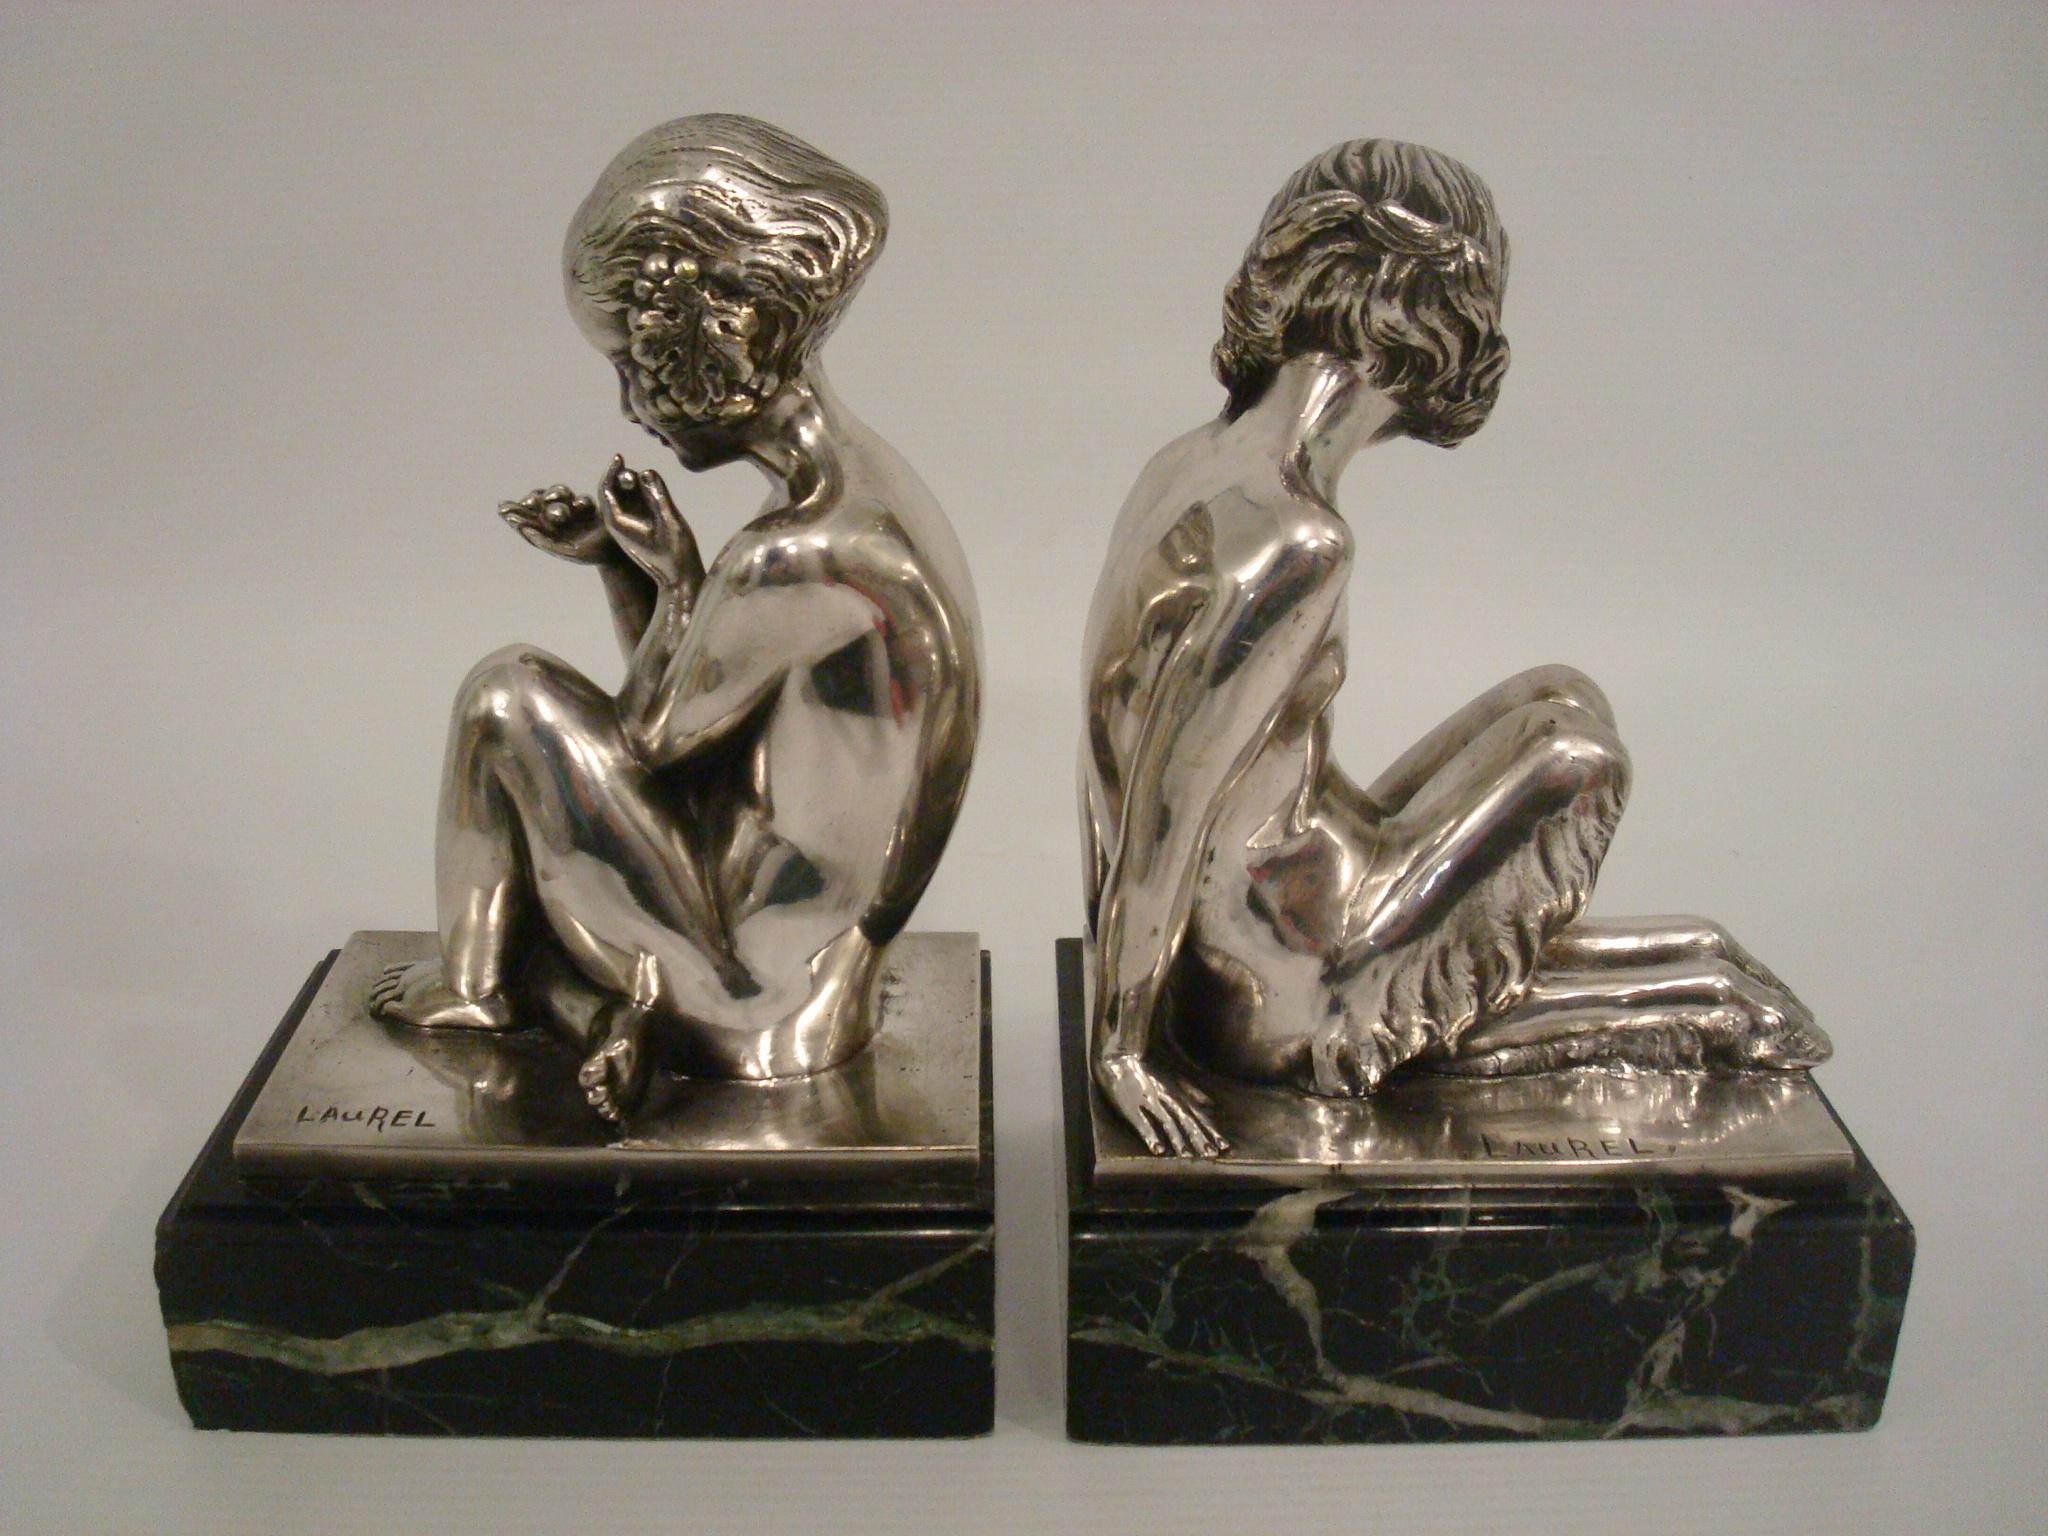 Art Deco Silvered bronze bookends of a young satyr and girl holding grapes. 
By Pierre Laurel. Fantastic Bronze details. Signed Laurel. 
France 1925-1930.
Literature:
“Bronzes, sculptors and founders” by H. Berman
“Art Deco sculpture” by Victor